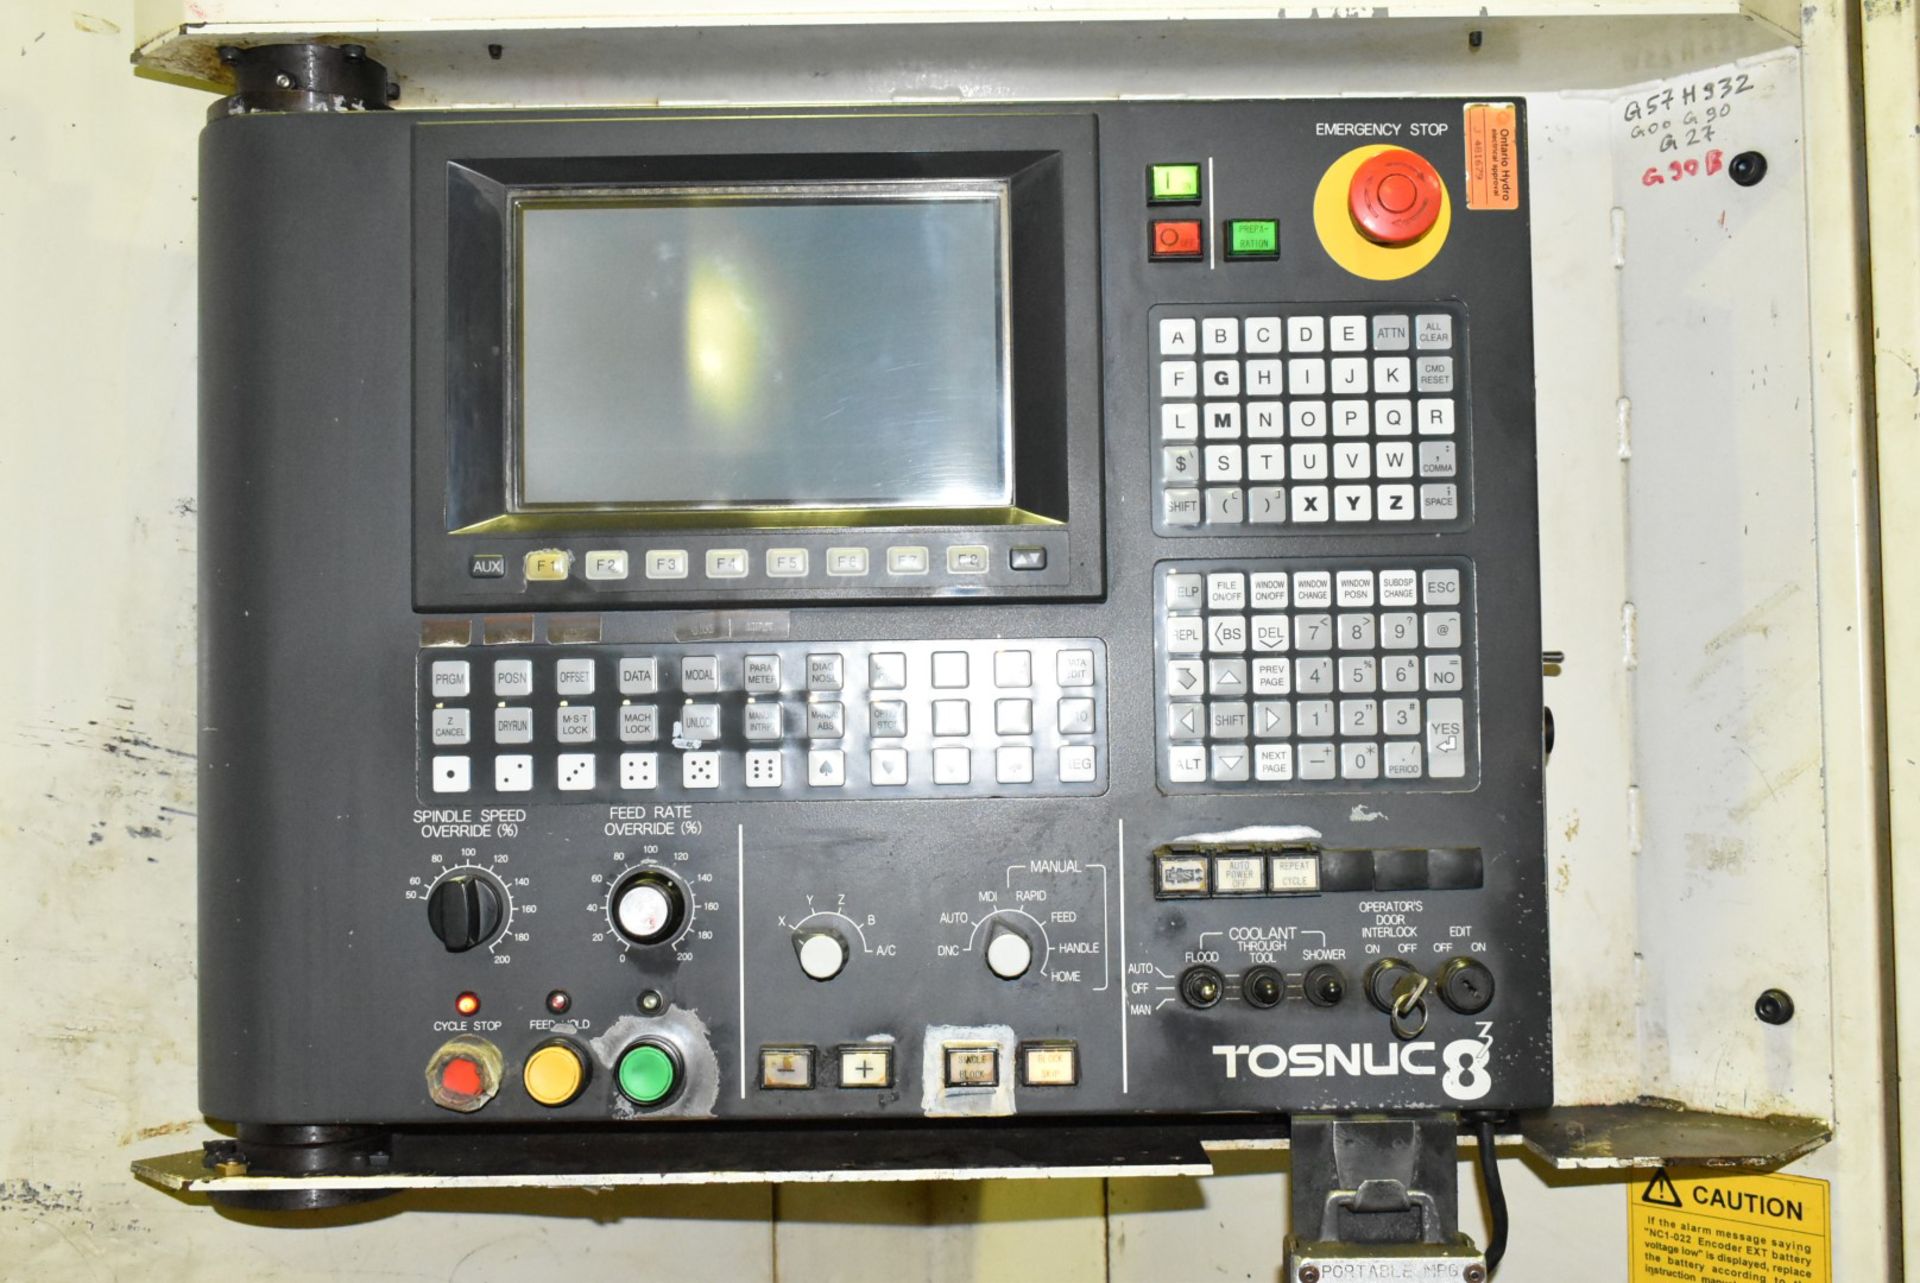 TOSHIBA BMC 800 CNC TWIN PALLET HORIZONTAL MACHINING CENTER WITH TOSNUC 8 CNC CONTROL, (2) 31.5" X - Image 3 of 8